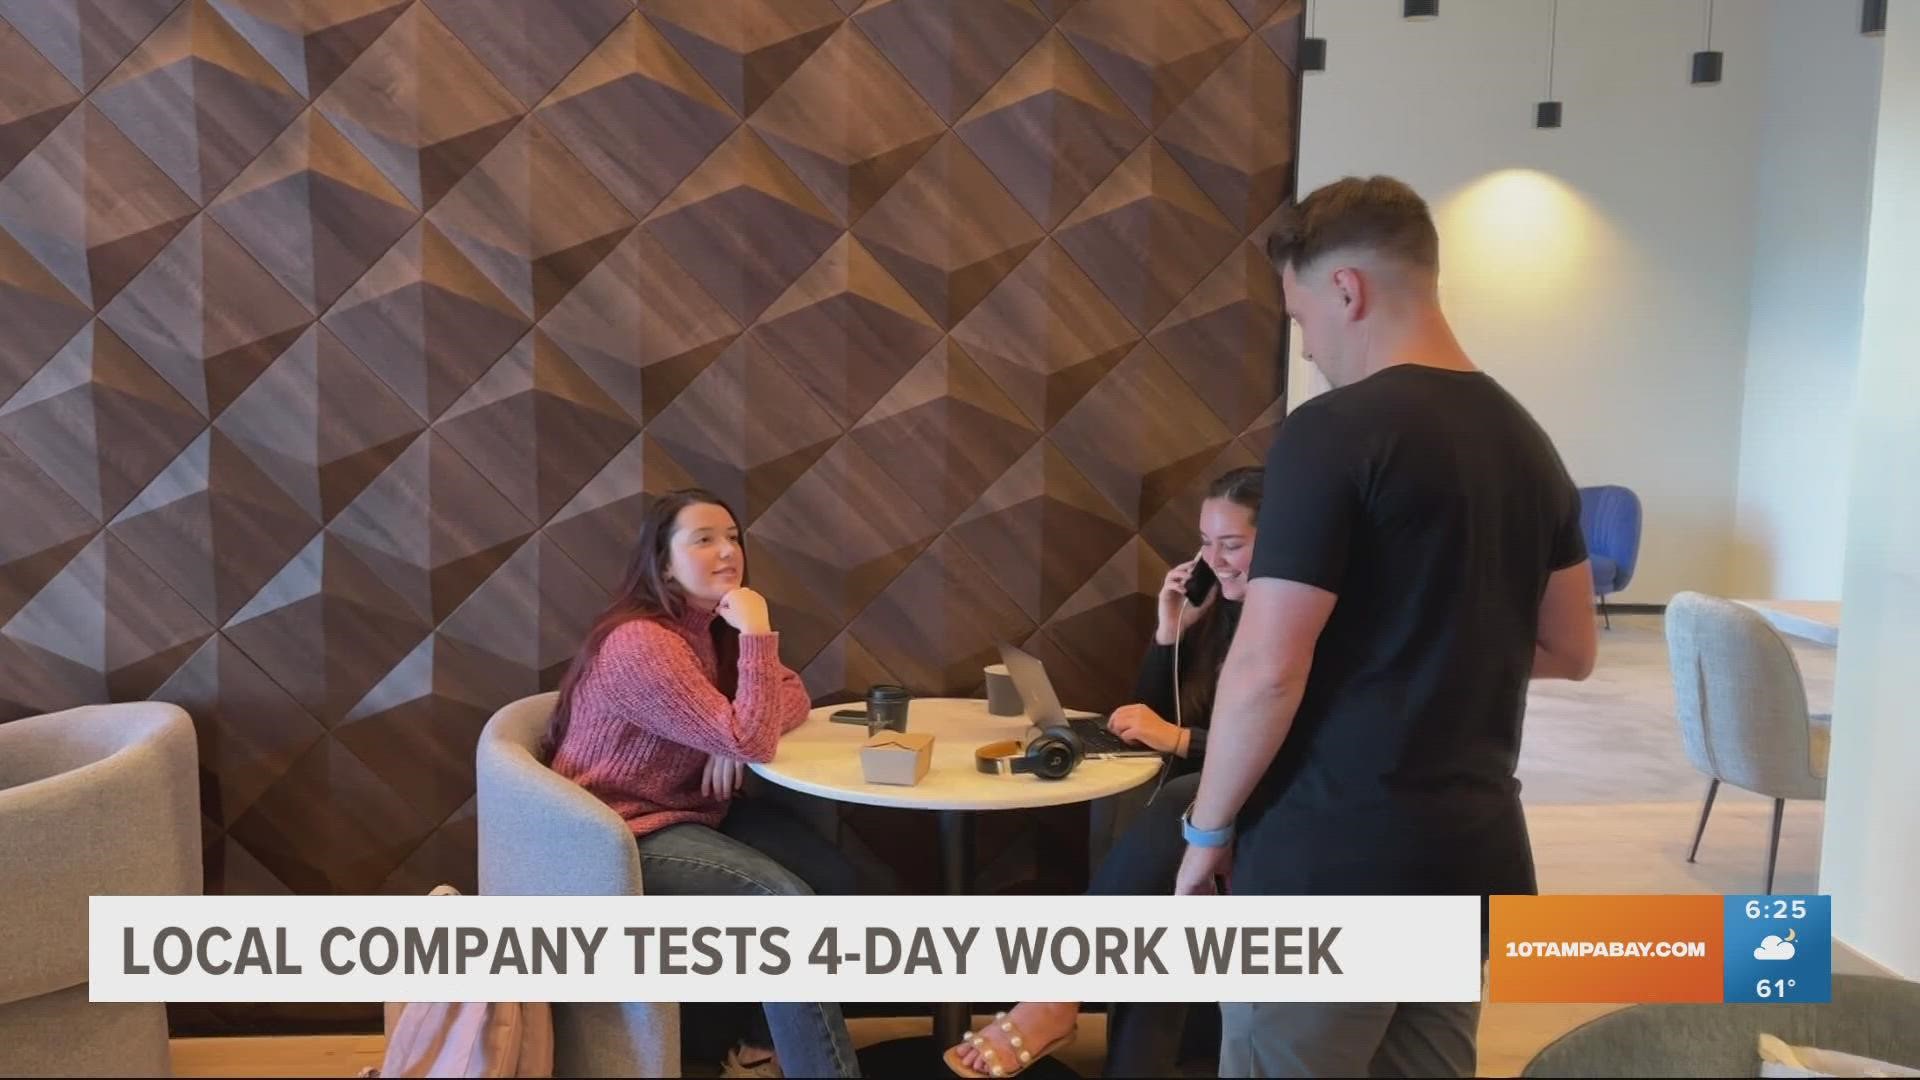 The CEO of one local business wants to help facilitate that "work-life" balance for his employees, so he's testing out a 4-day workweek.